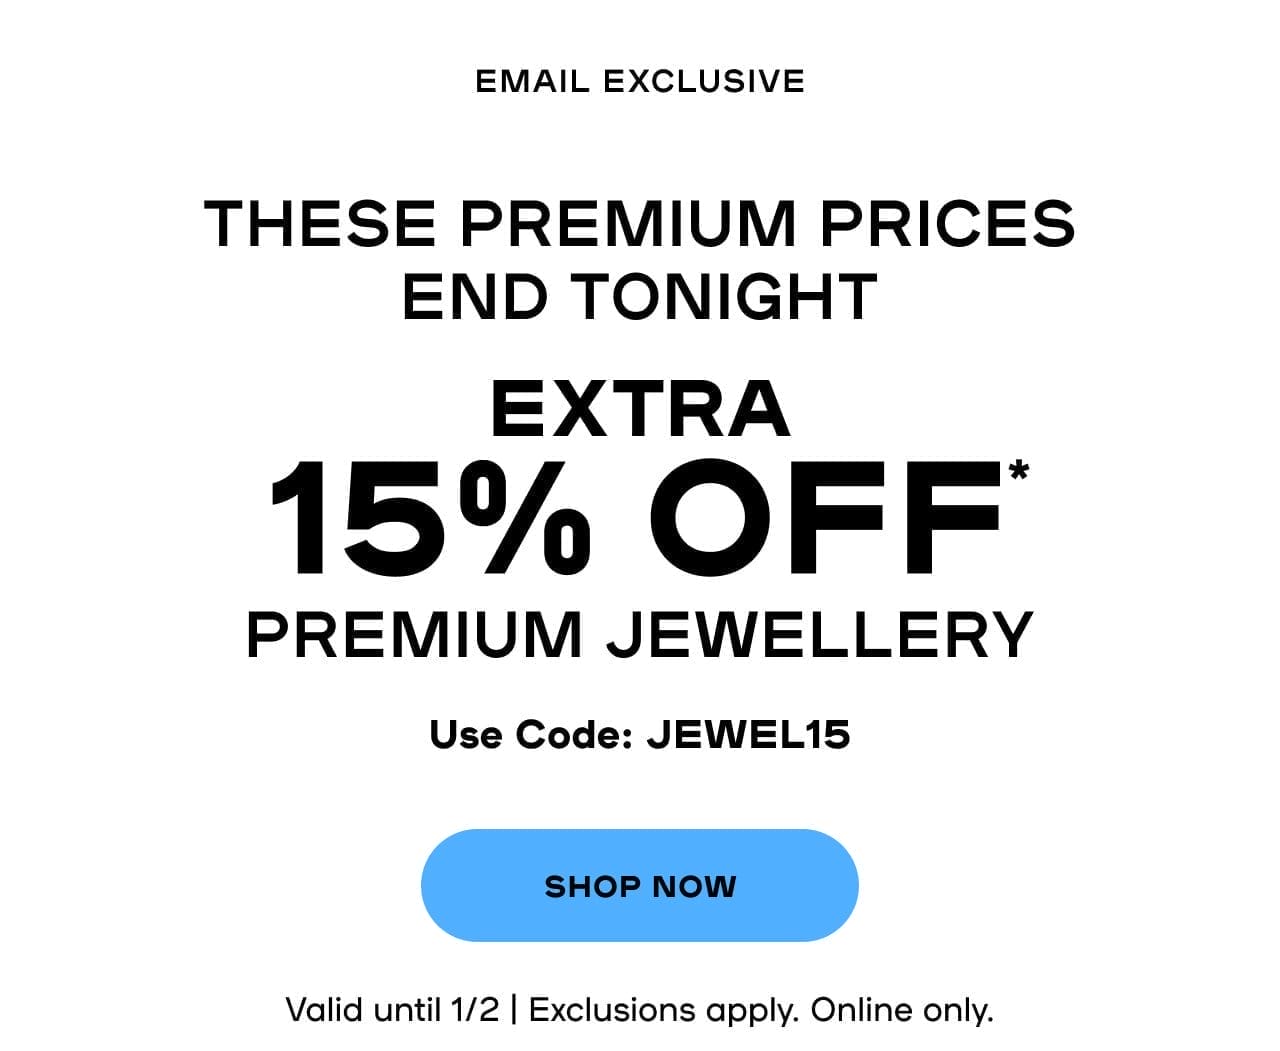 Email Exclusive These Premium Prices End TONIGHT EXTRA 15% OFF* Premium Jewellery Use code JEWEL15 Valid until 2/1 | Exclusions apply | Online only